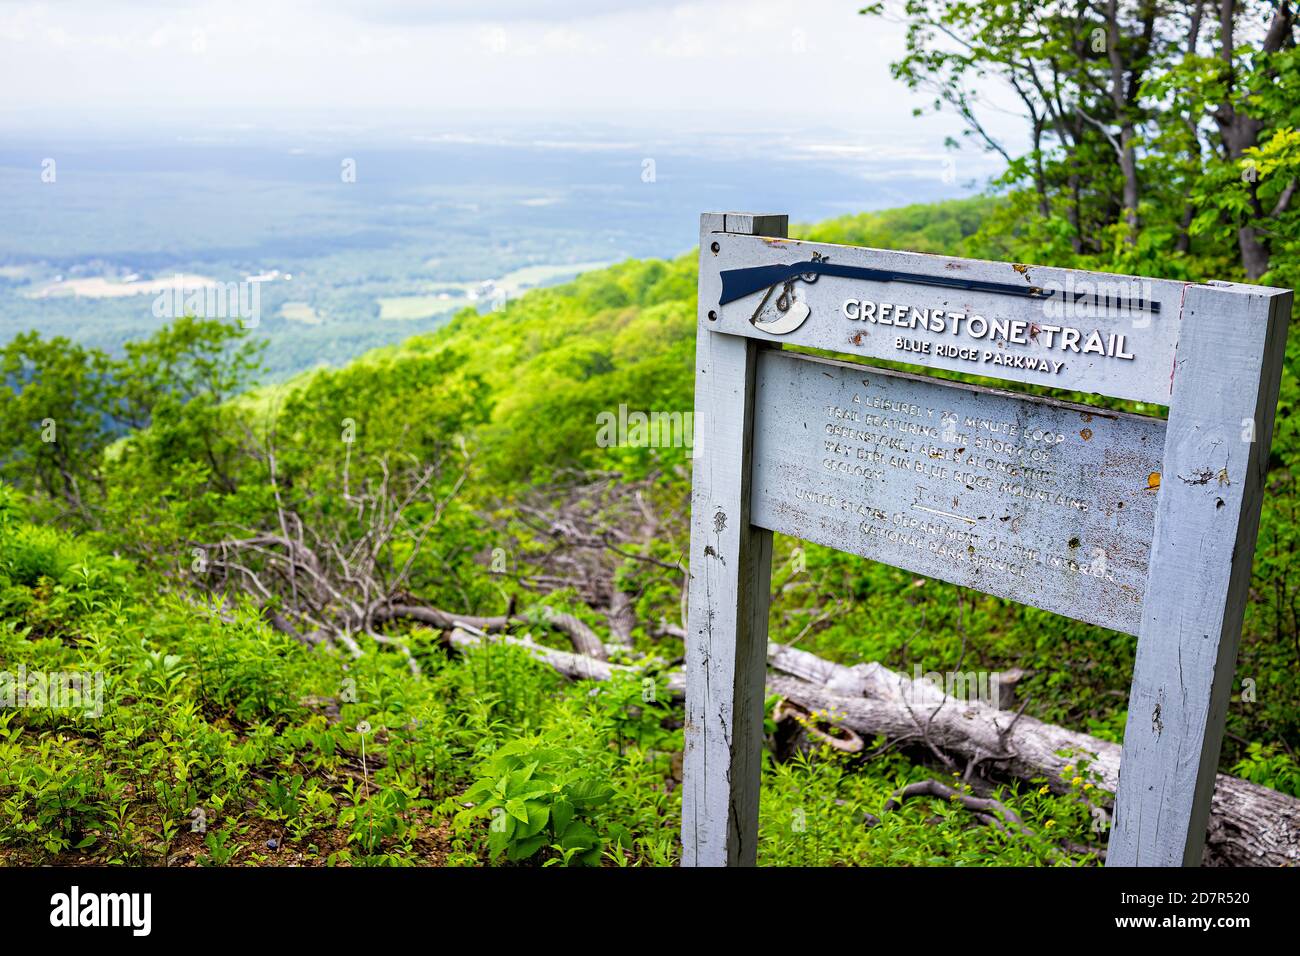 Lyndhurst, USA - June 9, 2020: Overlook sign and trailhead for Greenstone Trail at Blue Ridge parkway appalachian mountains in summer with nobody and Stock Photo